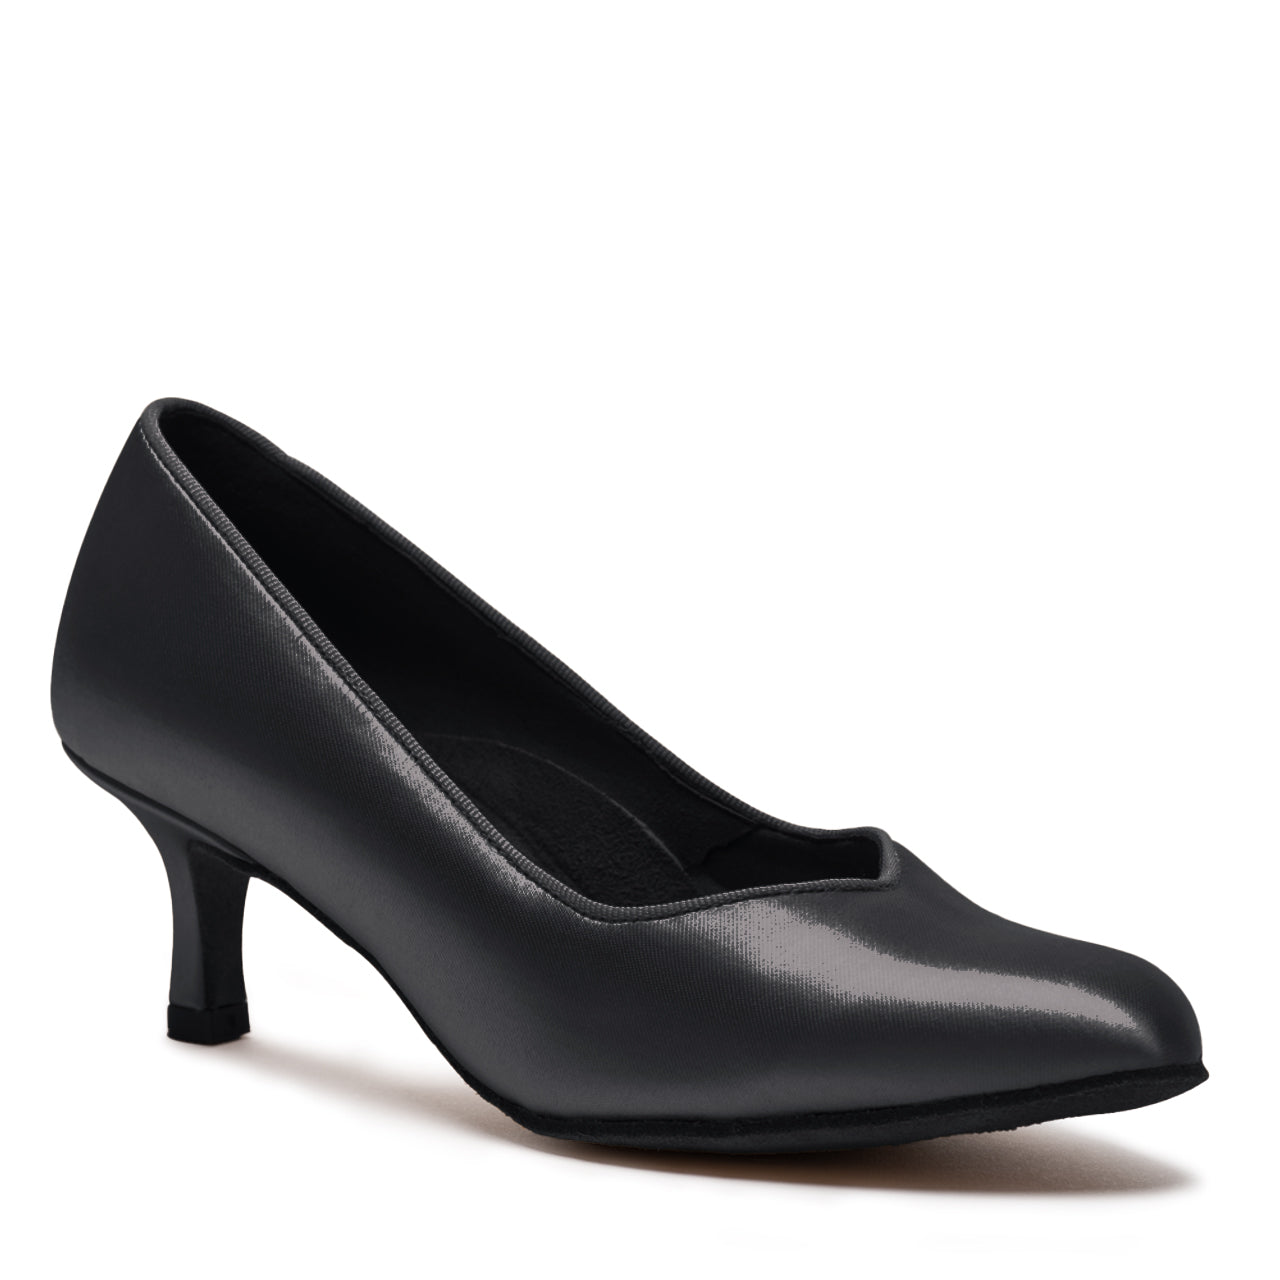 Standard Style International Dance Shoes IDS Ladies Satin Ballroom Shoe. Available in Multiple Colors and Heel Options. ICS VISTA